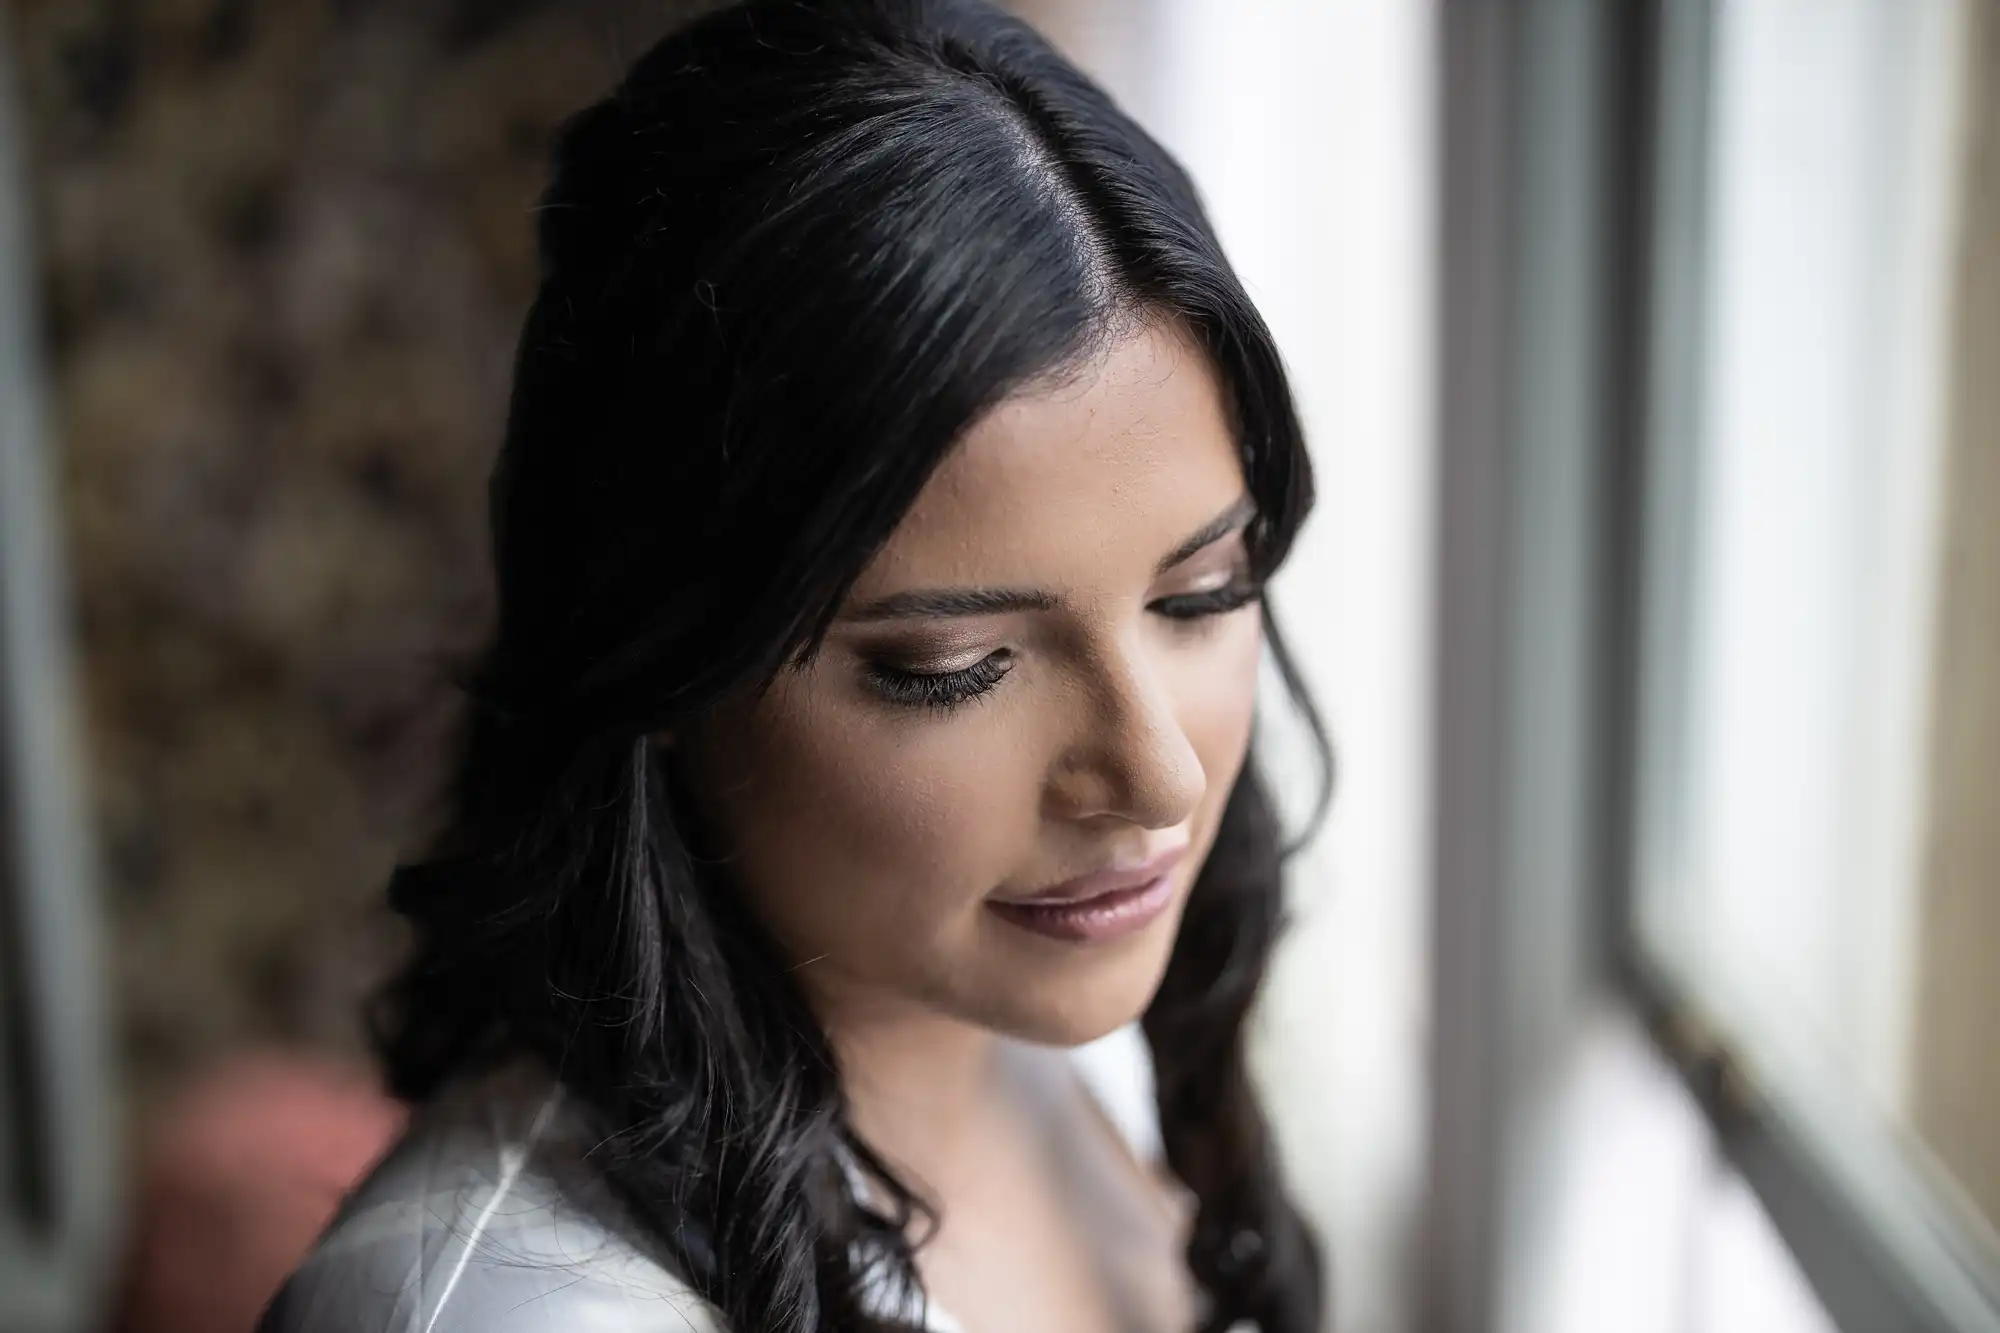 Woman with dark hair in white attire gazing down thoughtfully near a window.